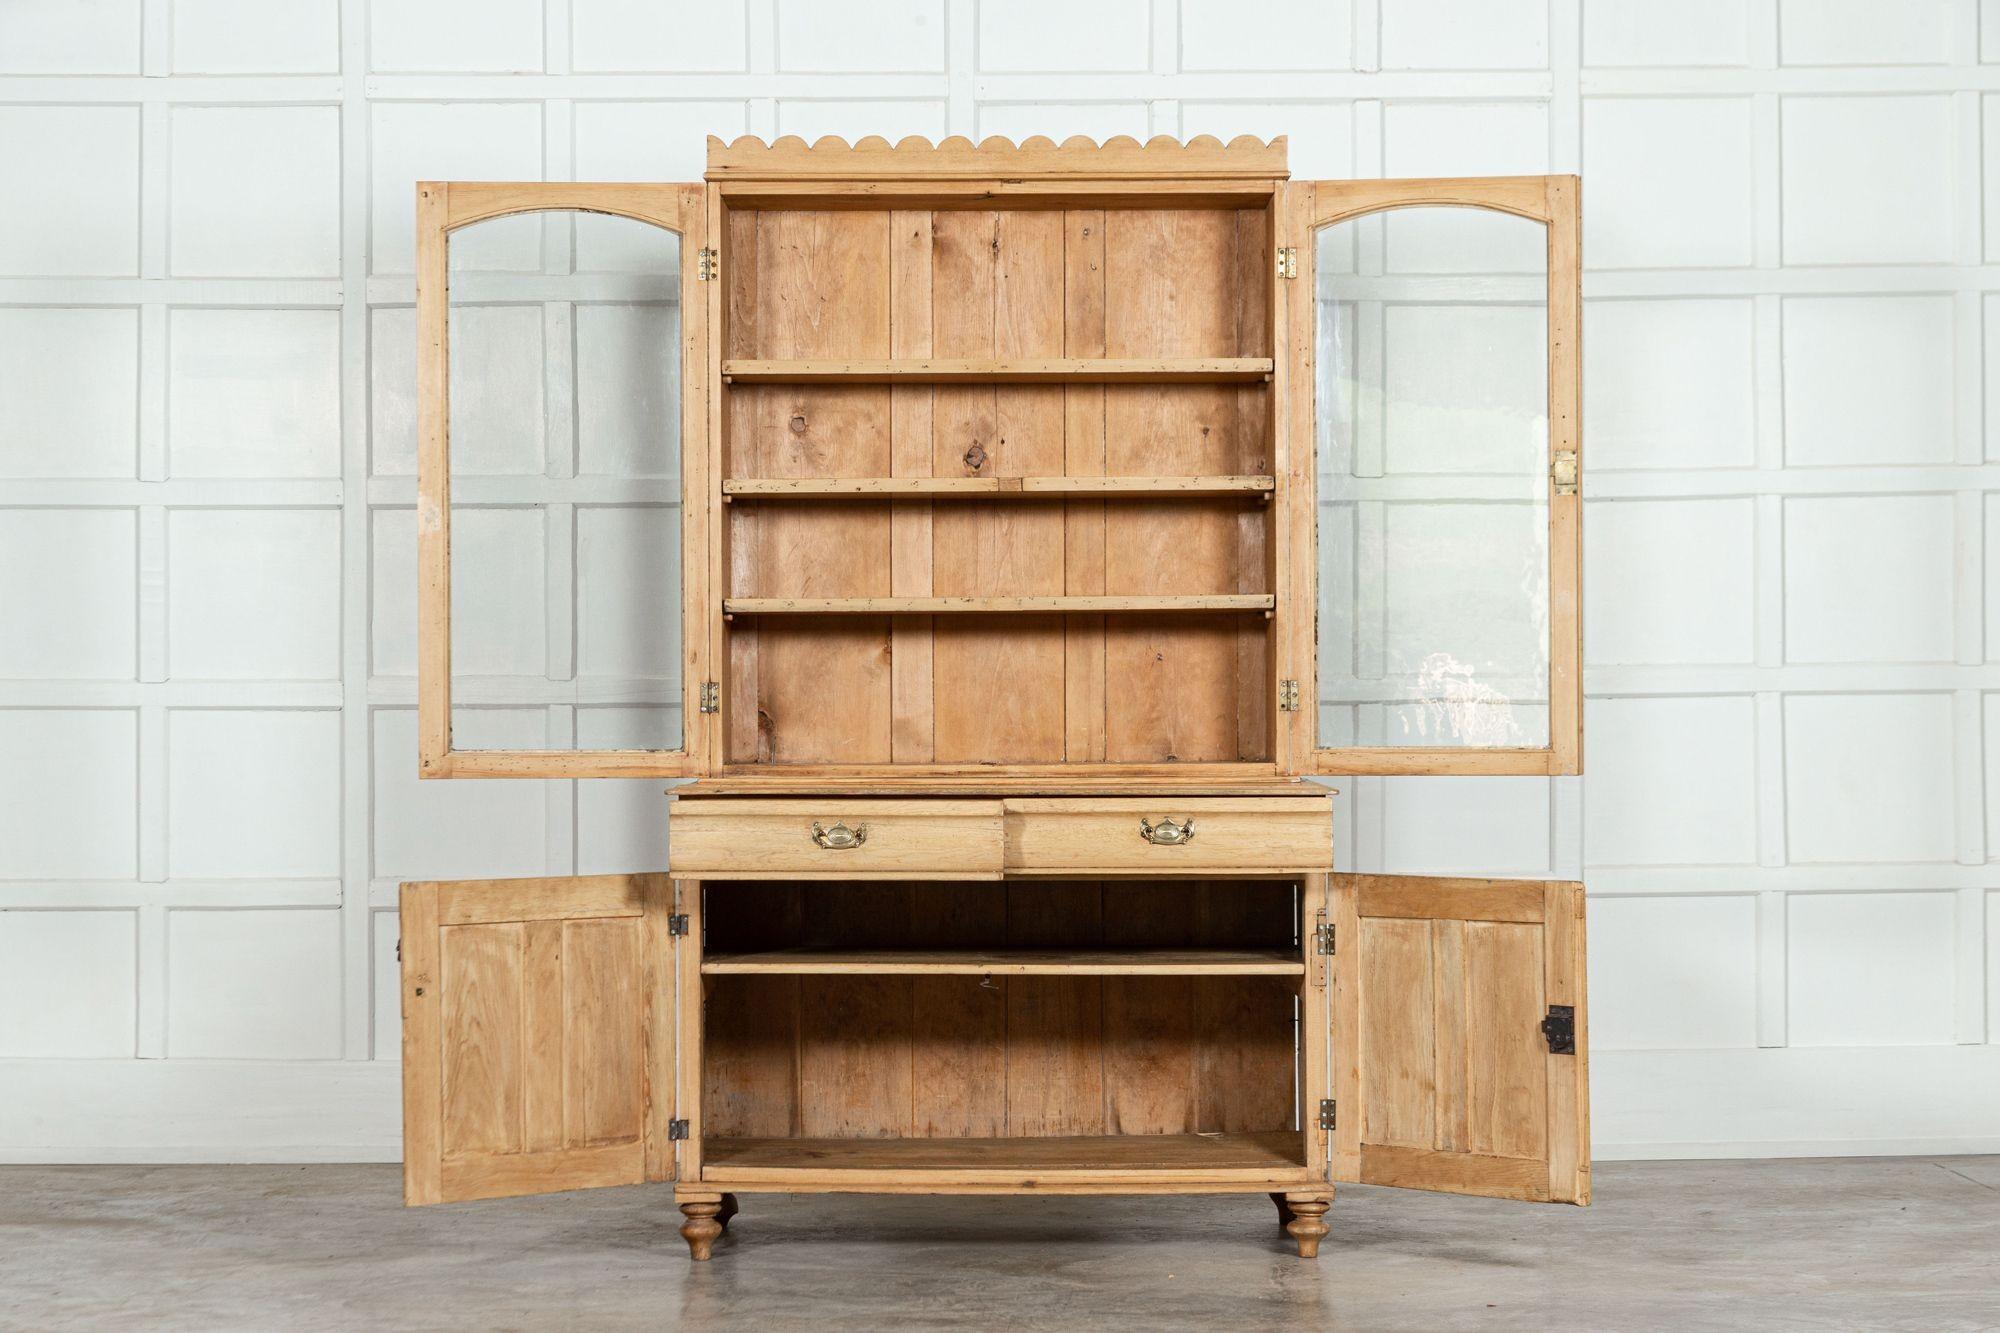 circa 1880
19th century English Pine Glazed Dresser
We can also customise existing pieces to suit your scheme/requirements. We have our own workshop, restorers and finishers. From adapting to finishing pieces including, stripping, bleaching,